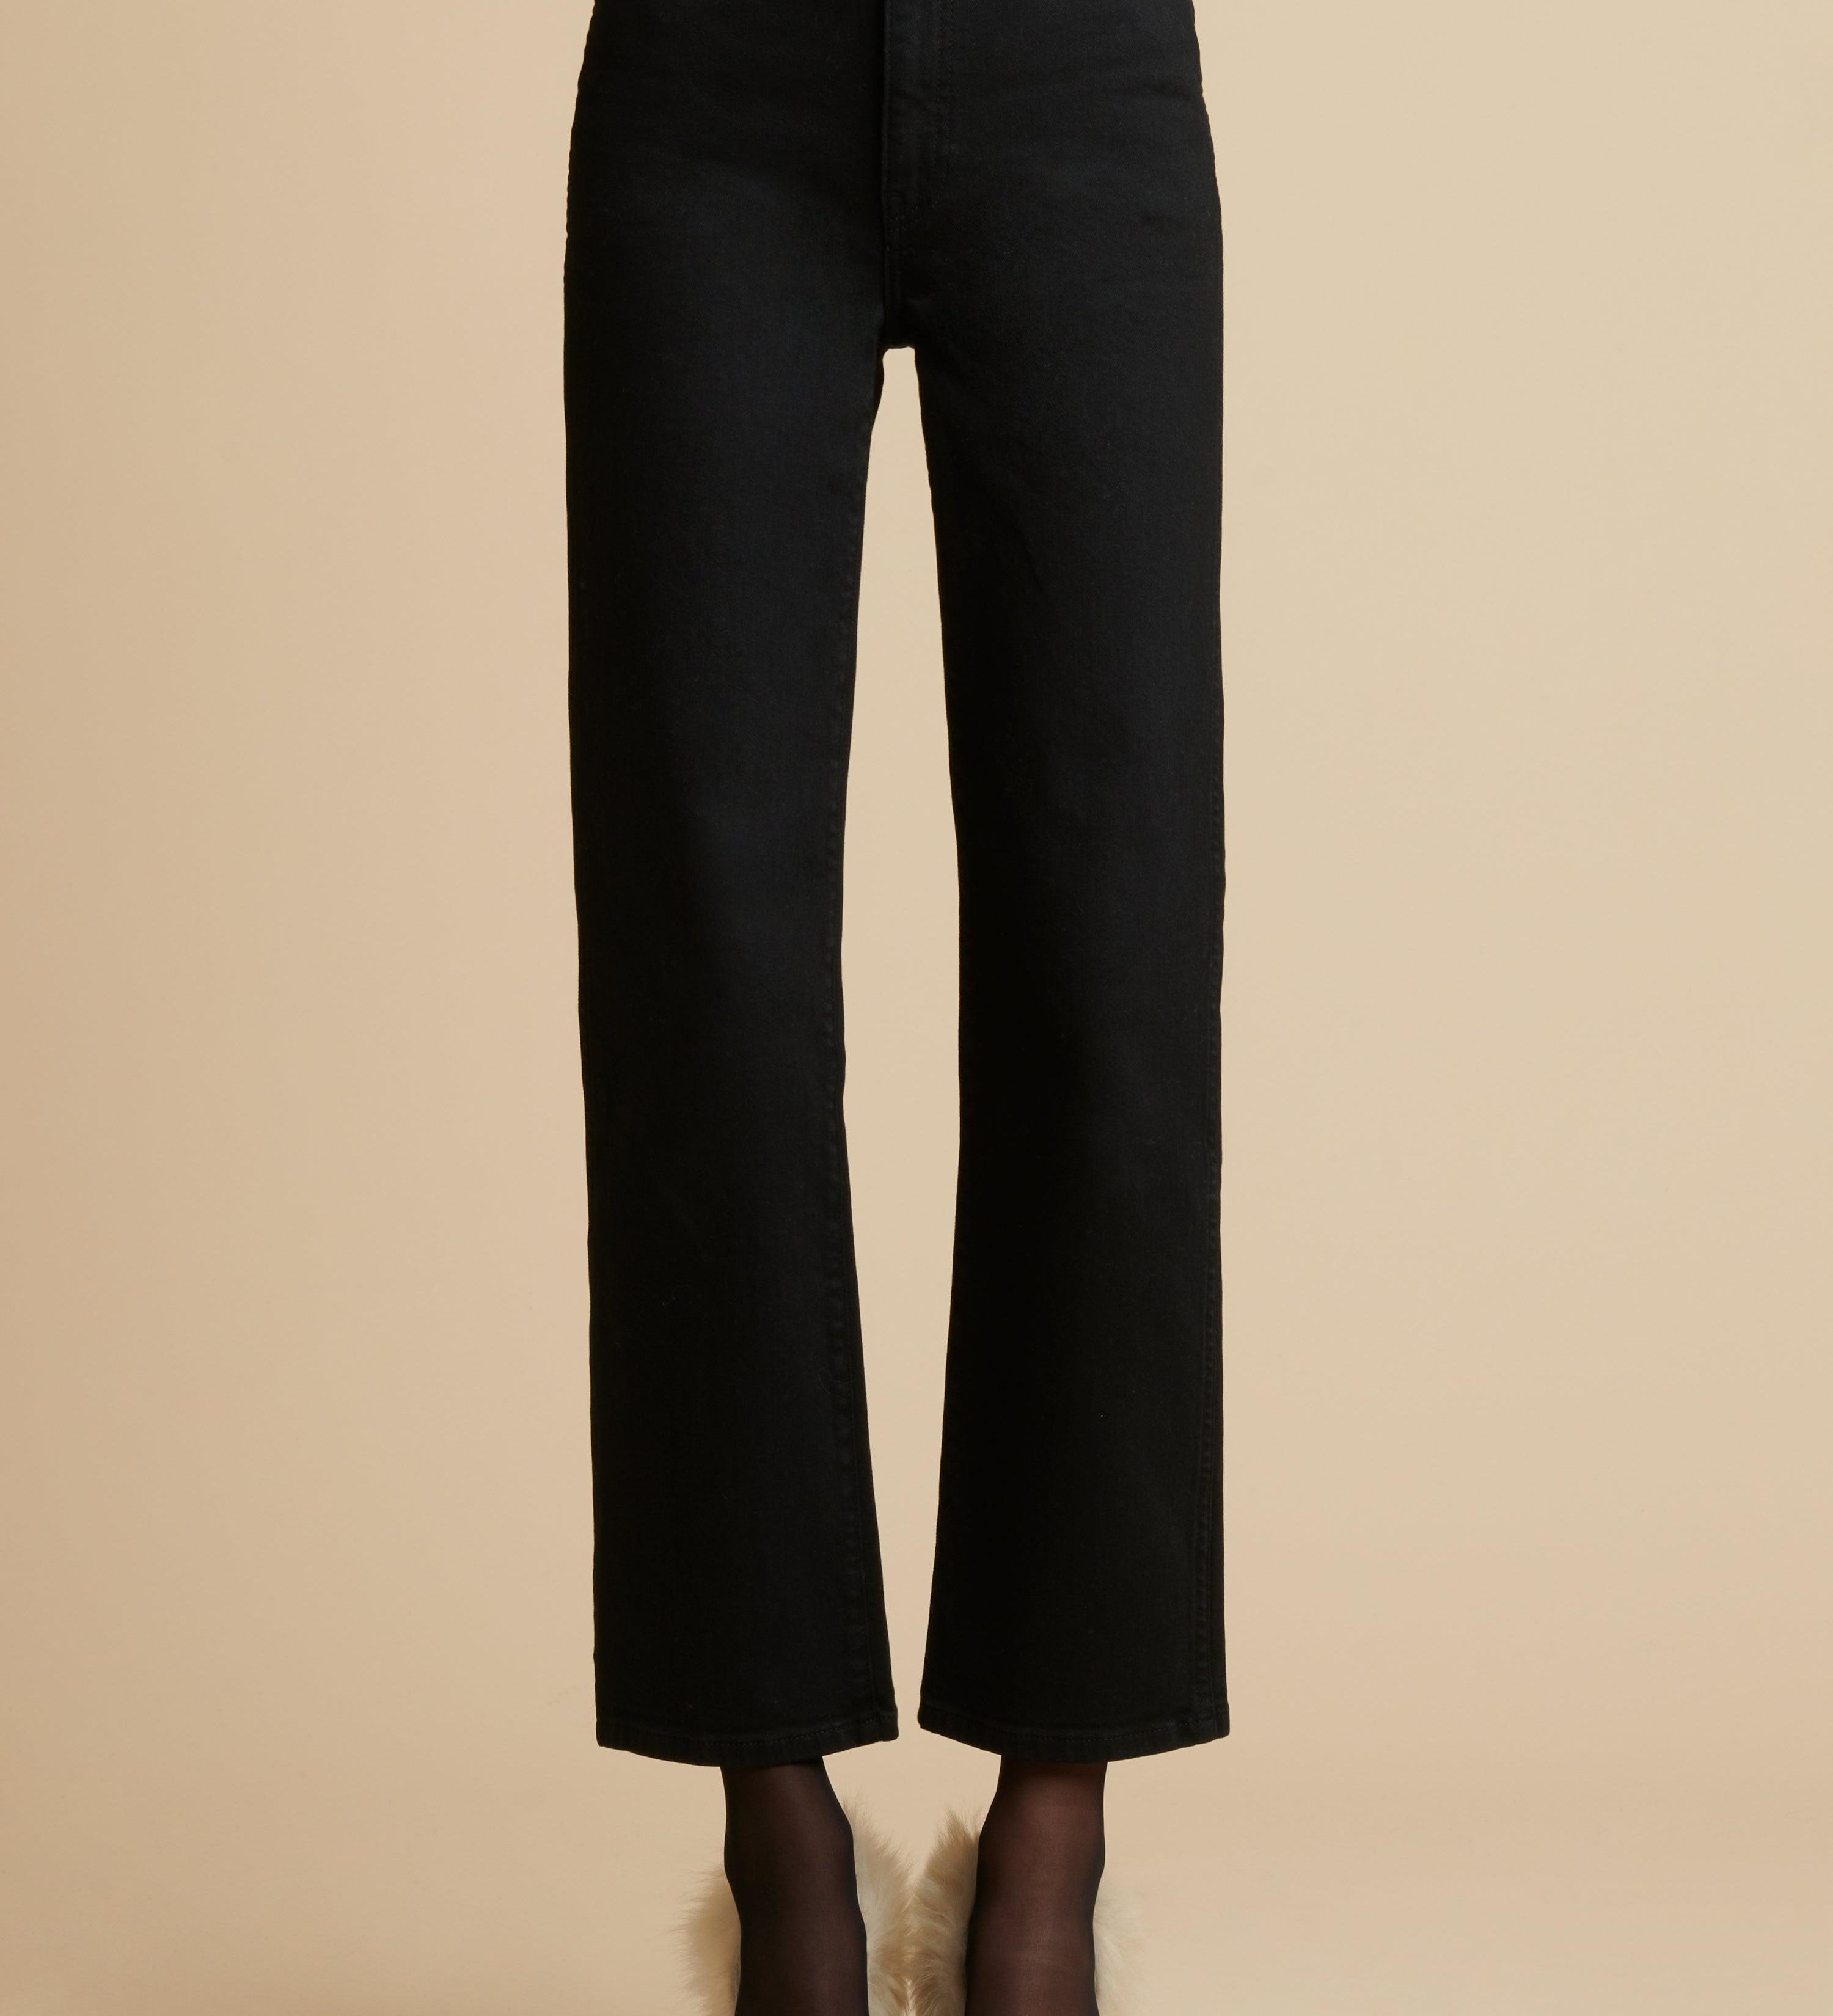 The Abigail Stretch Jean in Wilcox - The Iconic Issue